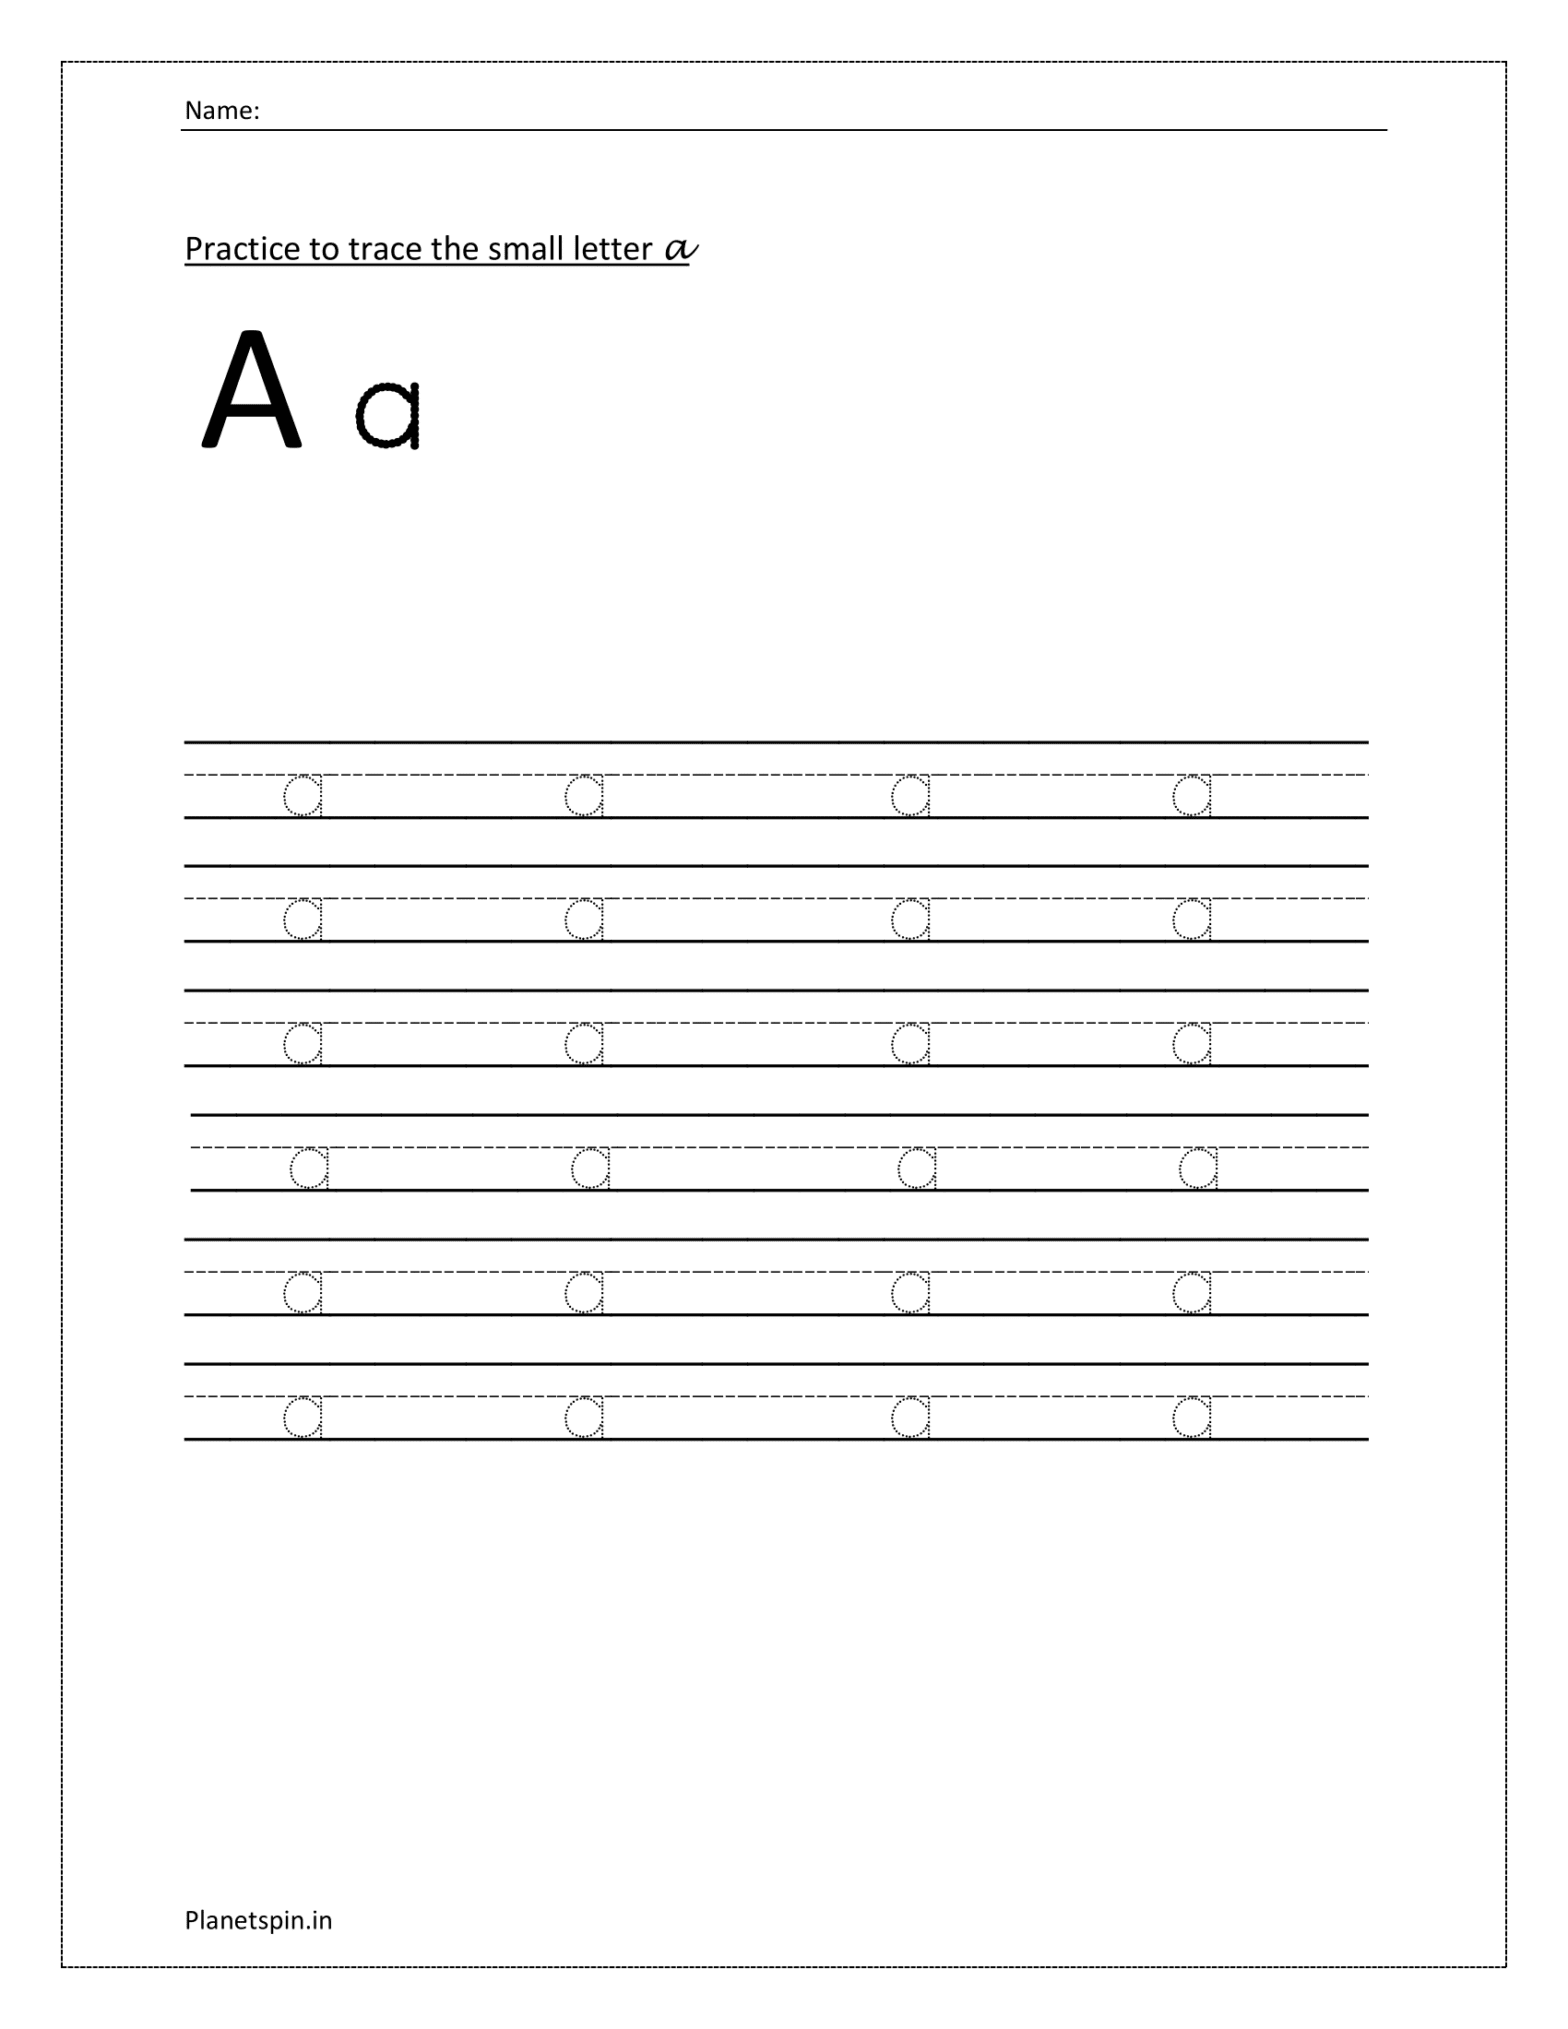 Worksheets of letter a | Planetspin.in